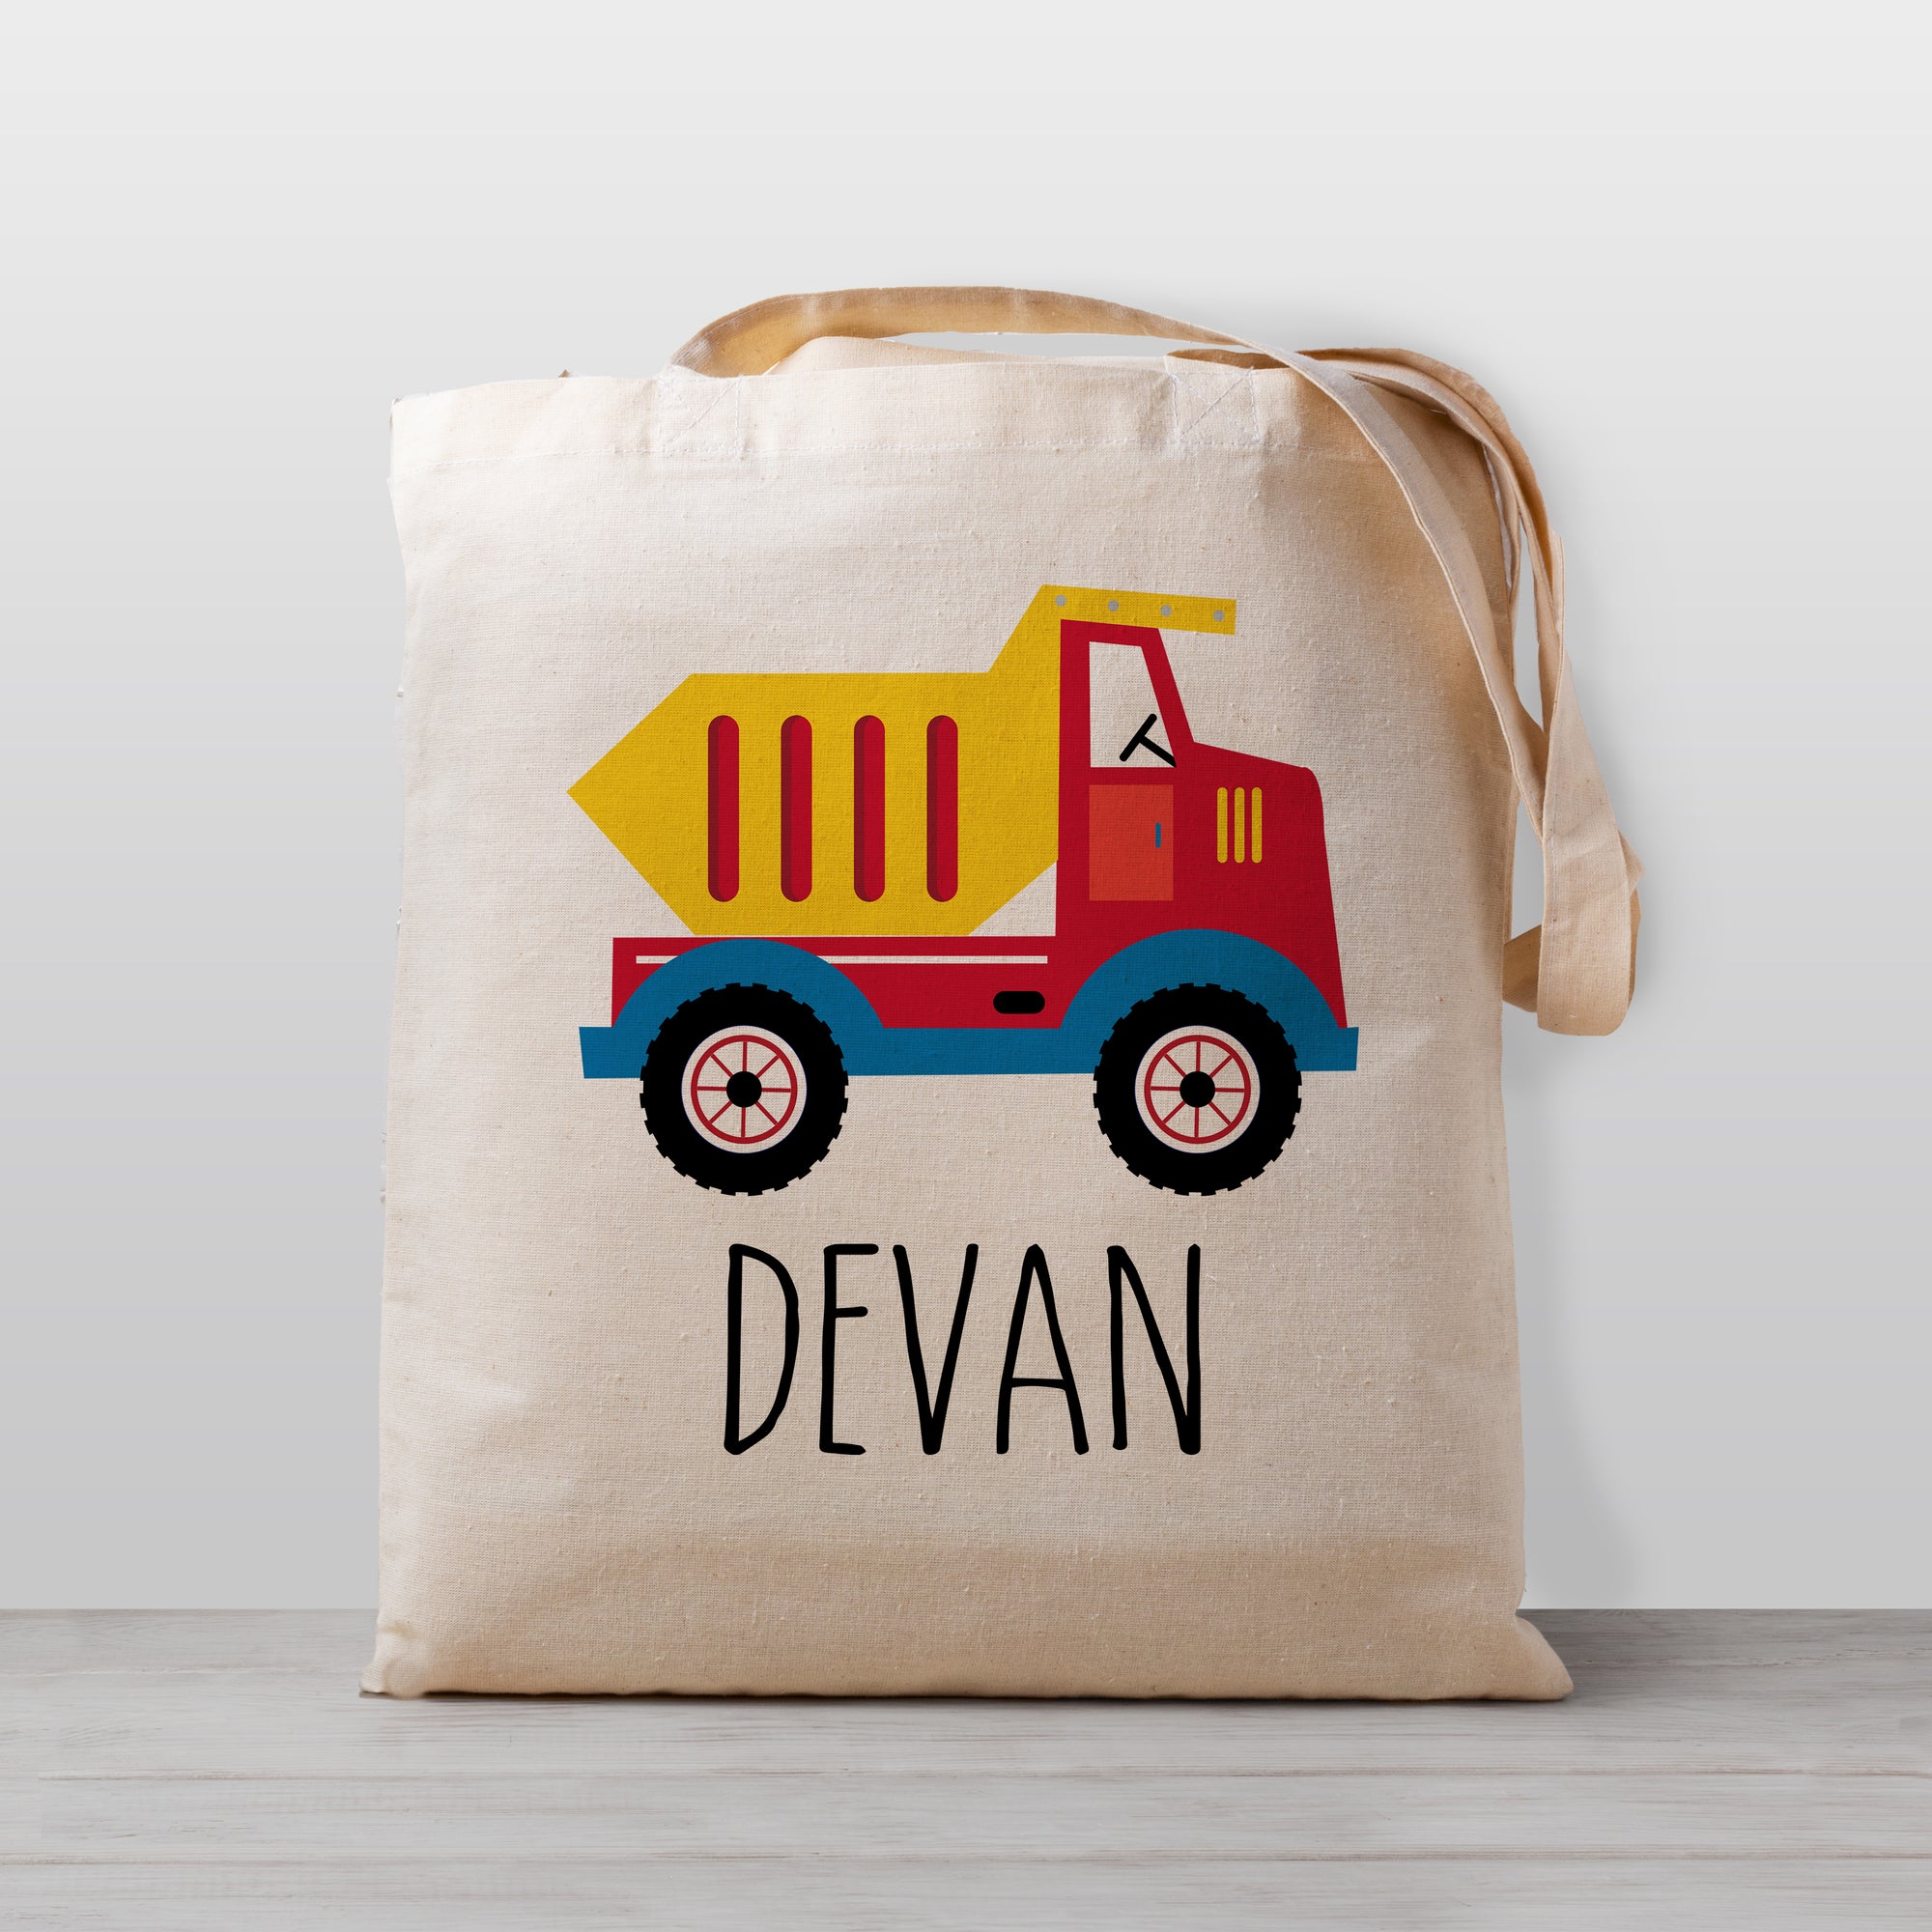 Personalized dump truck tote bag, lightweight and easy for kids to carry, 100% natural cotton canvas